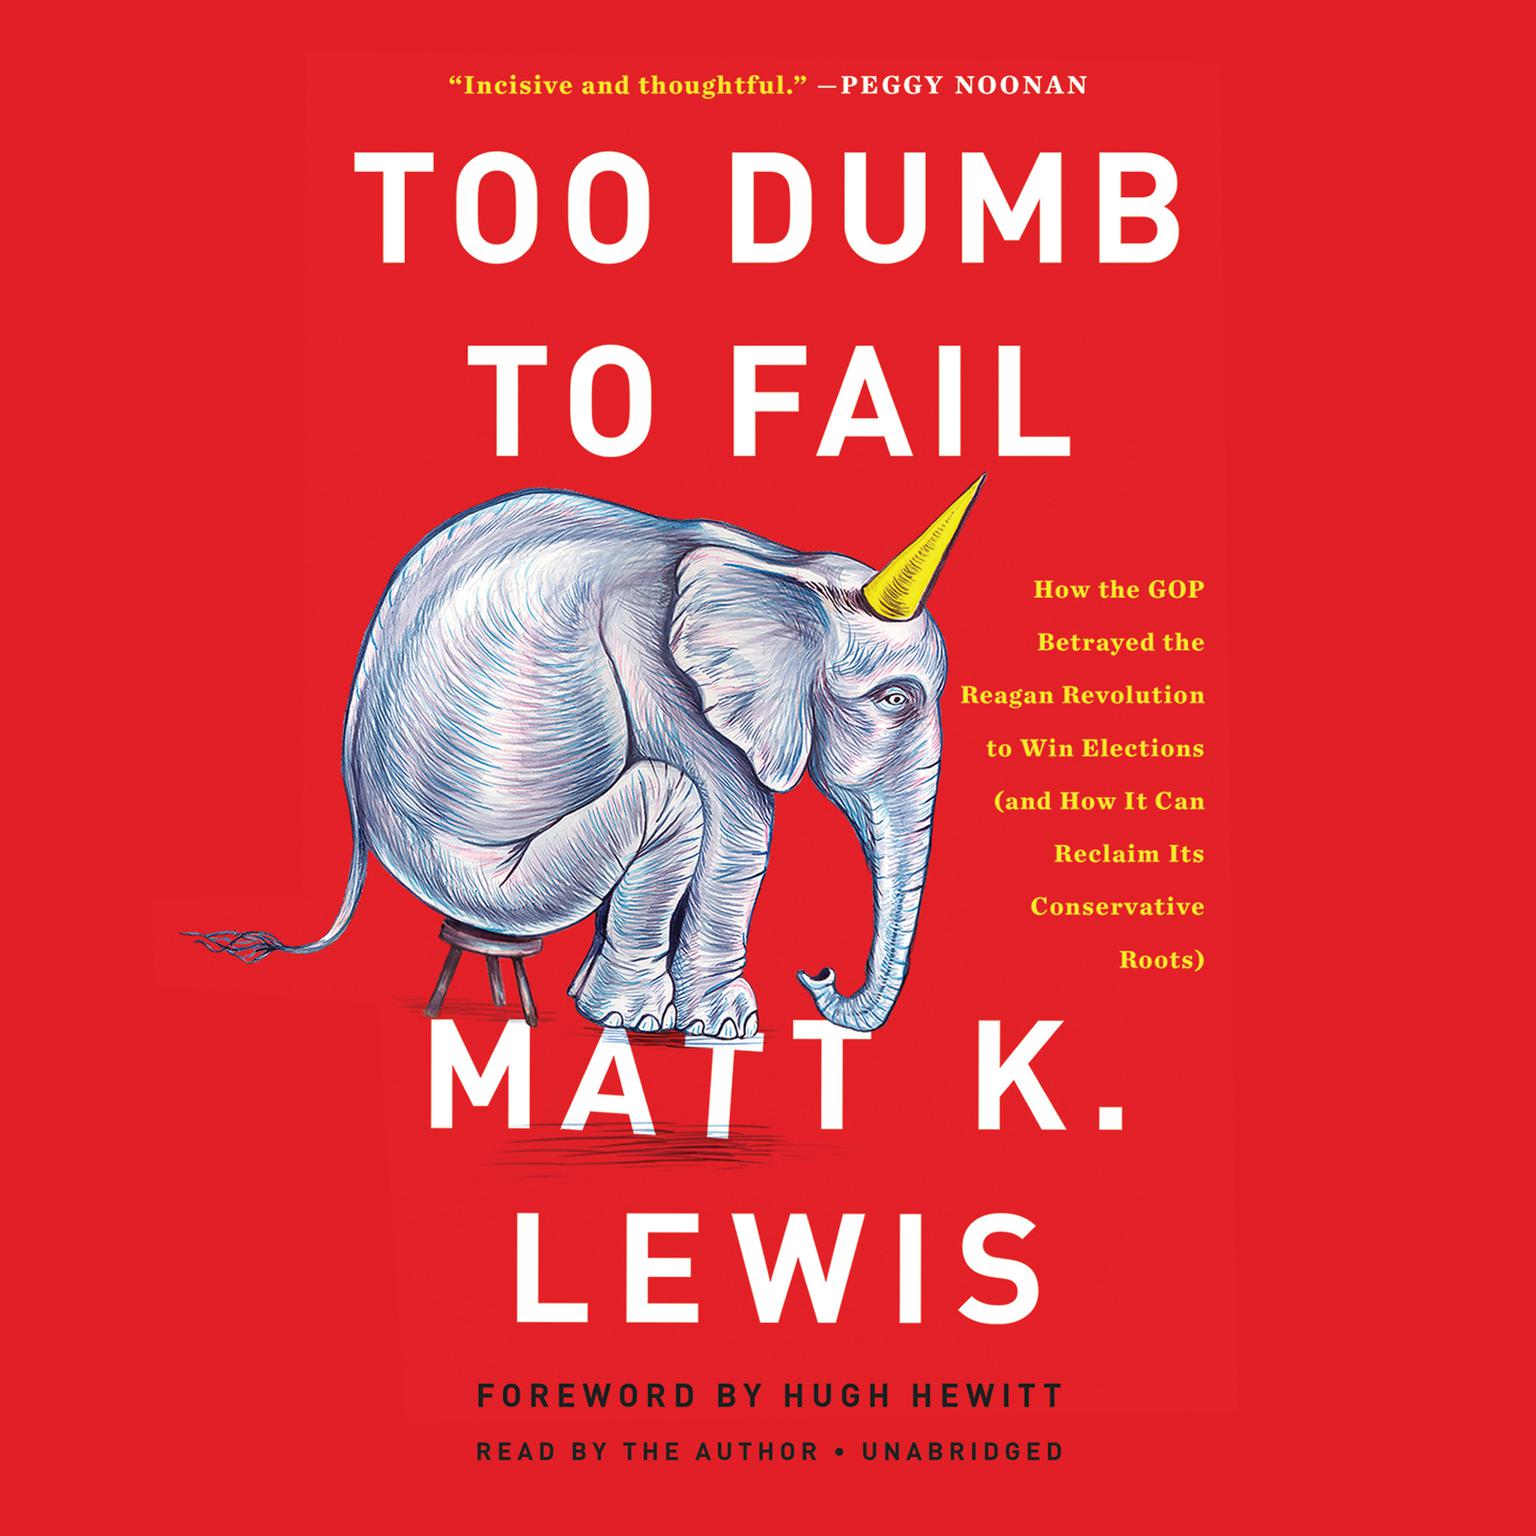 Too Dumb to Fail: How the GOP Betrayed the Reagan Revolution to Win Elections (and How It Can Reclaim Its Conservative Roots) Audiobook, by Matt K. Lewis